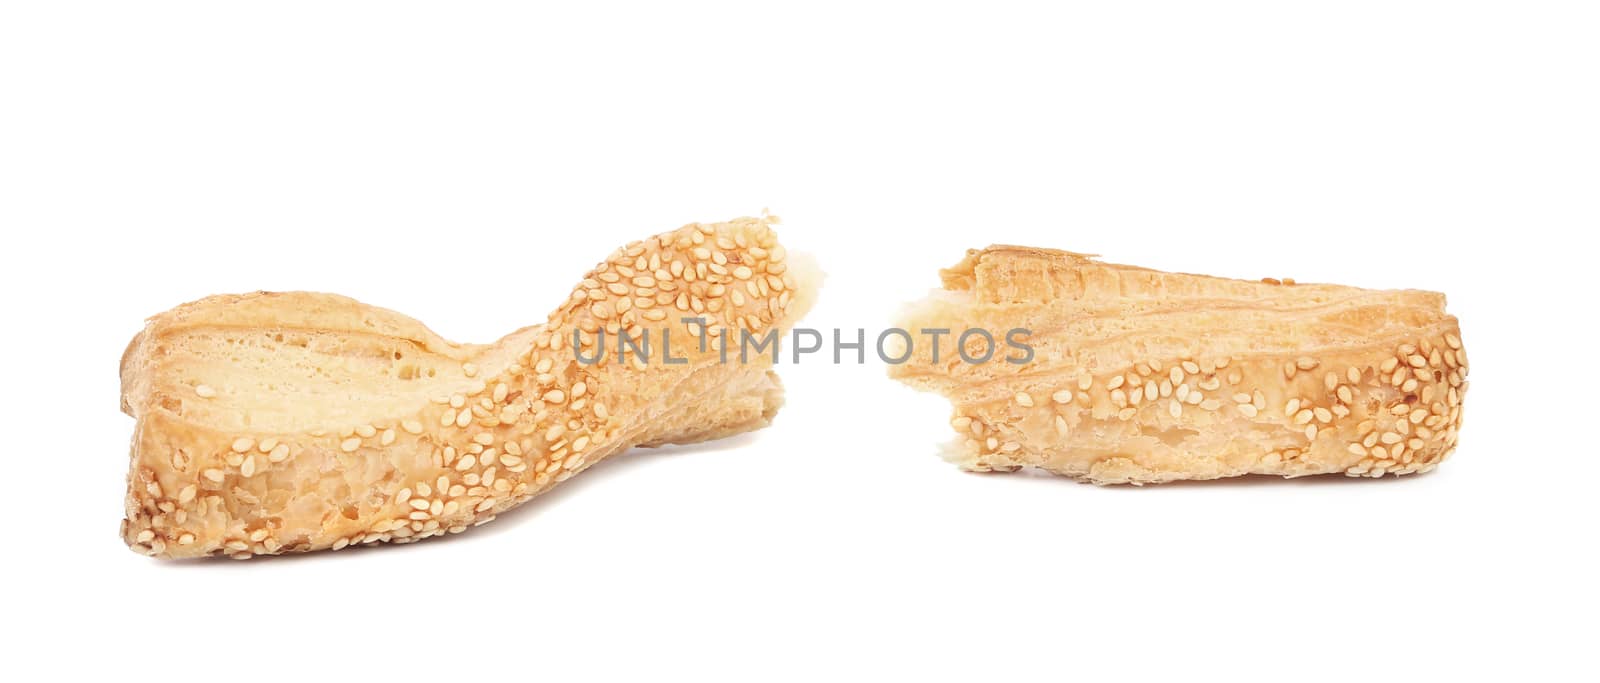 Broken cheese stick with seeds. Isolated on a white background